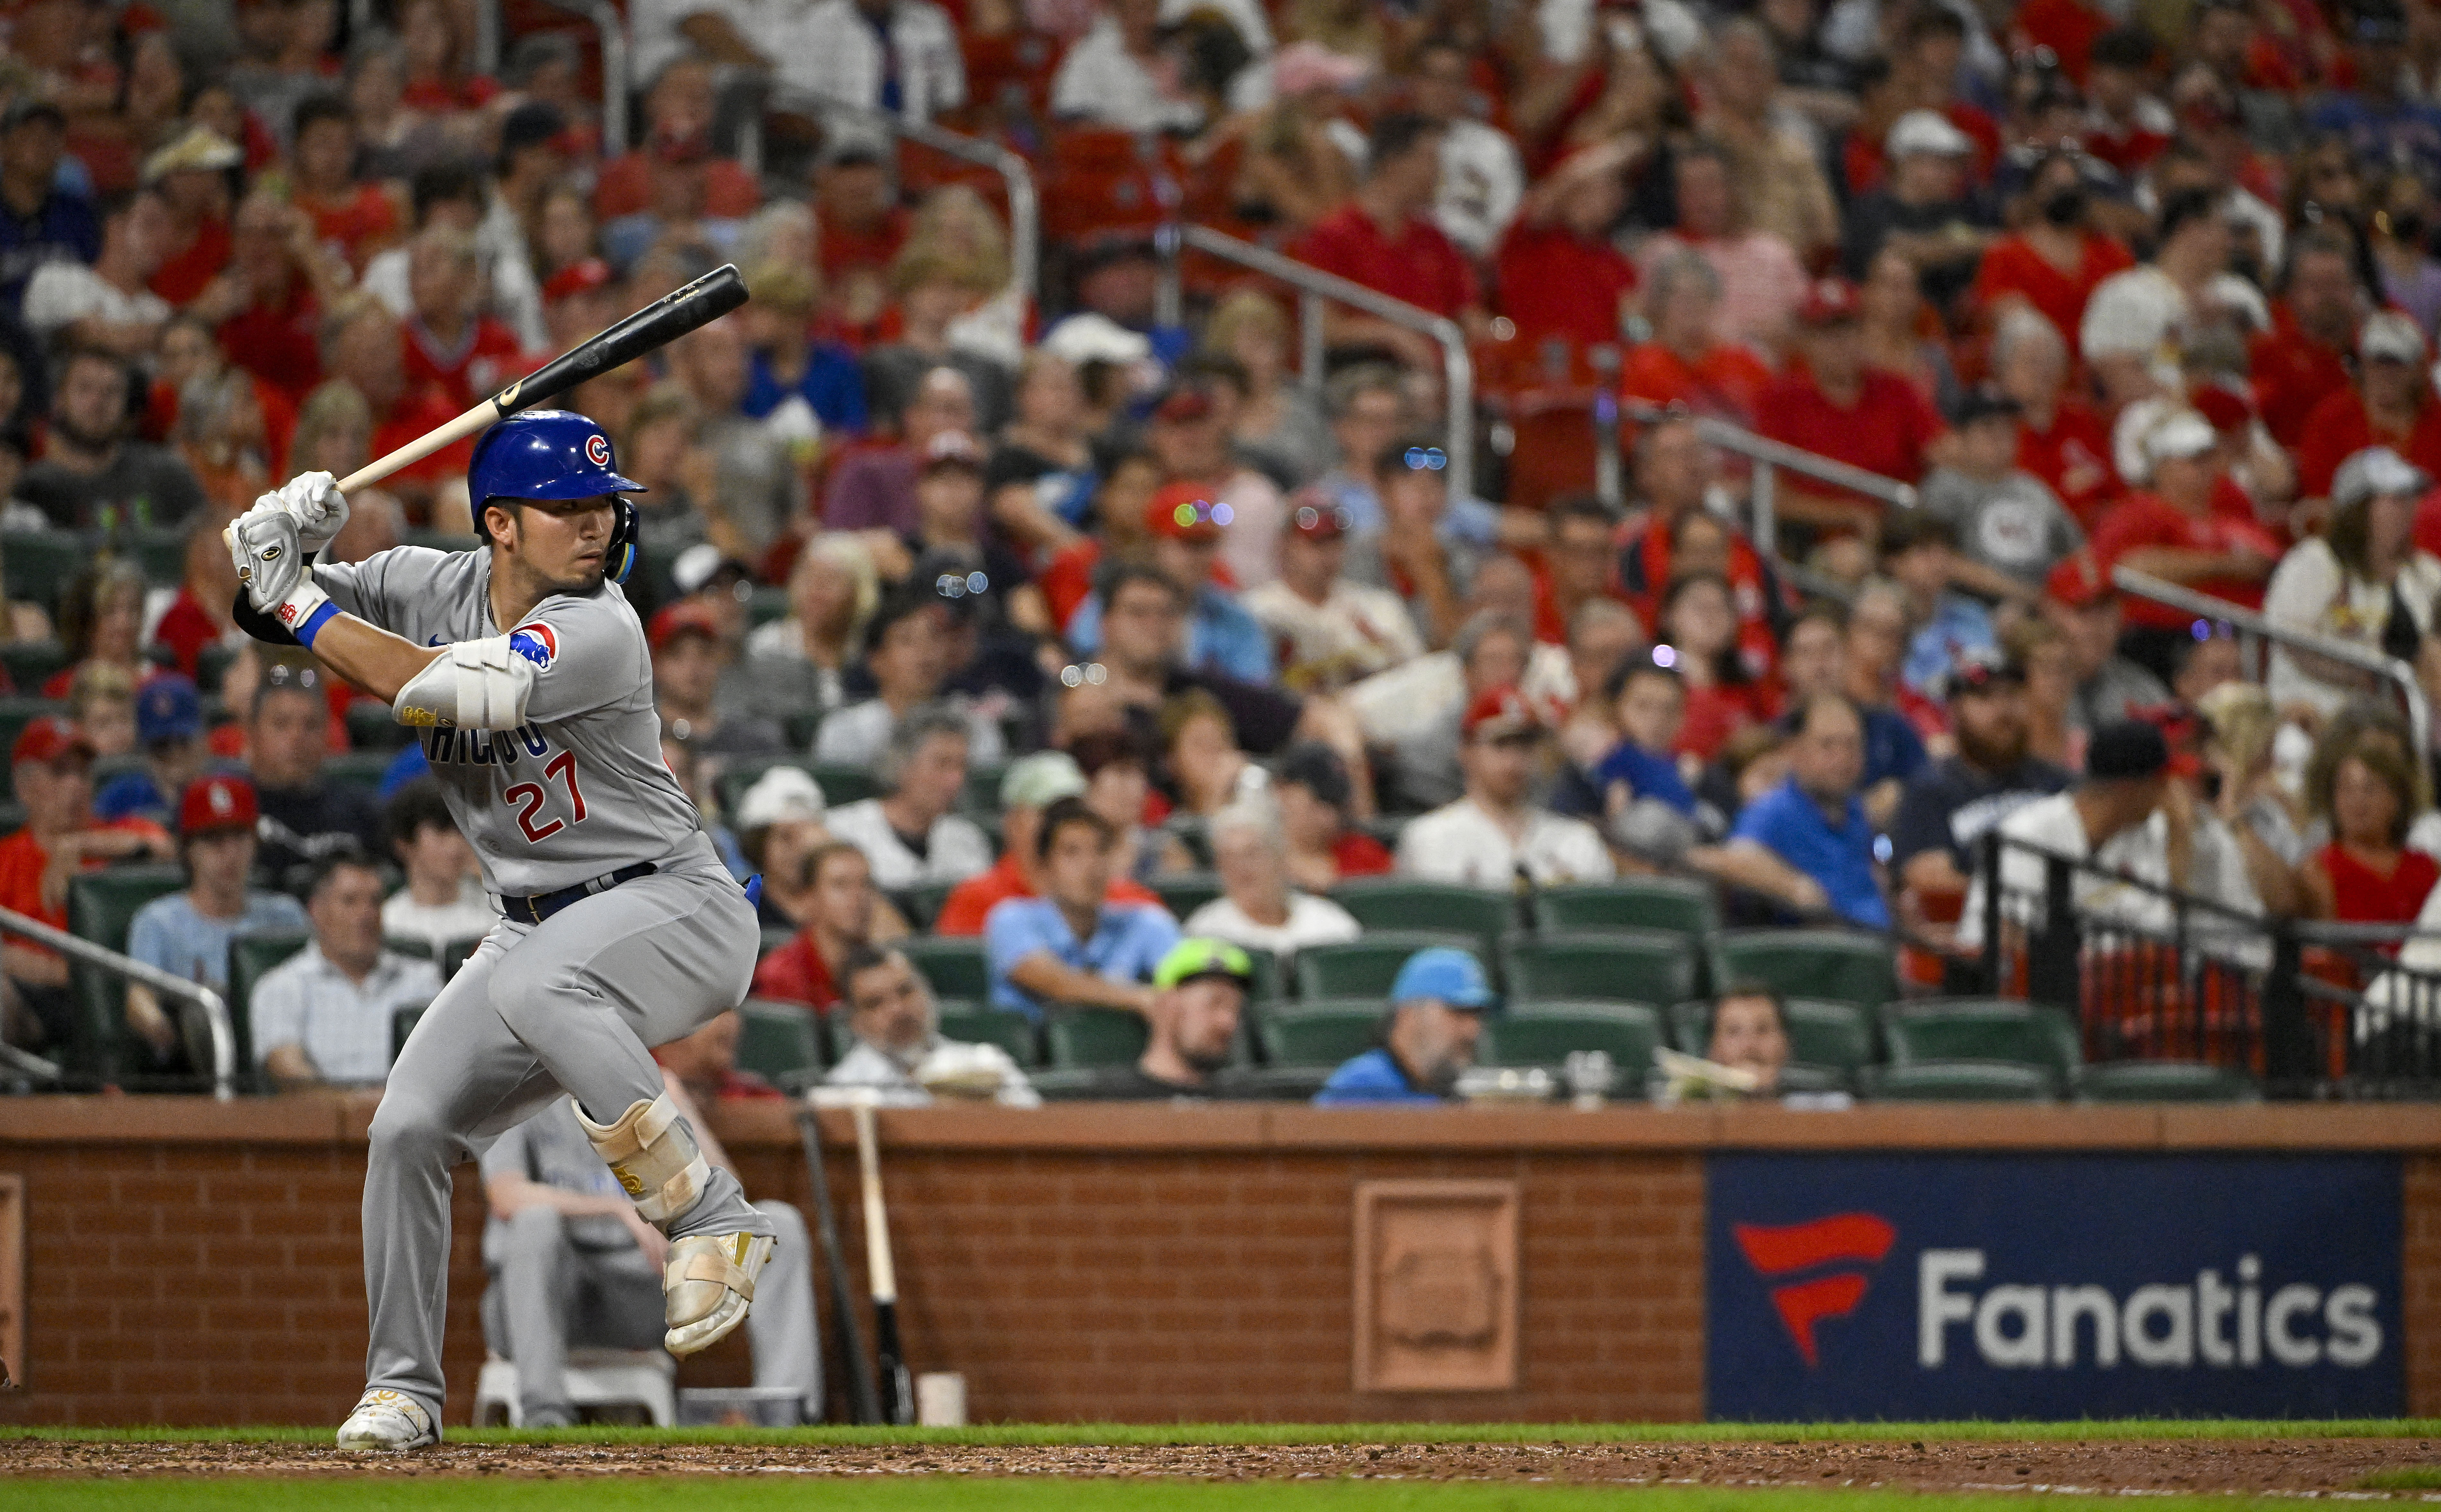 St. Louis Cardinals rally to split London Series with Cubs